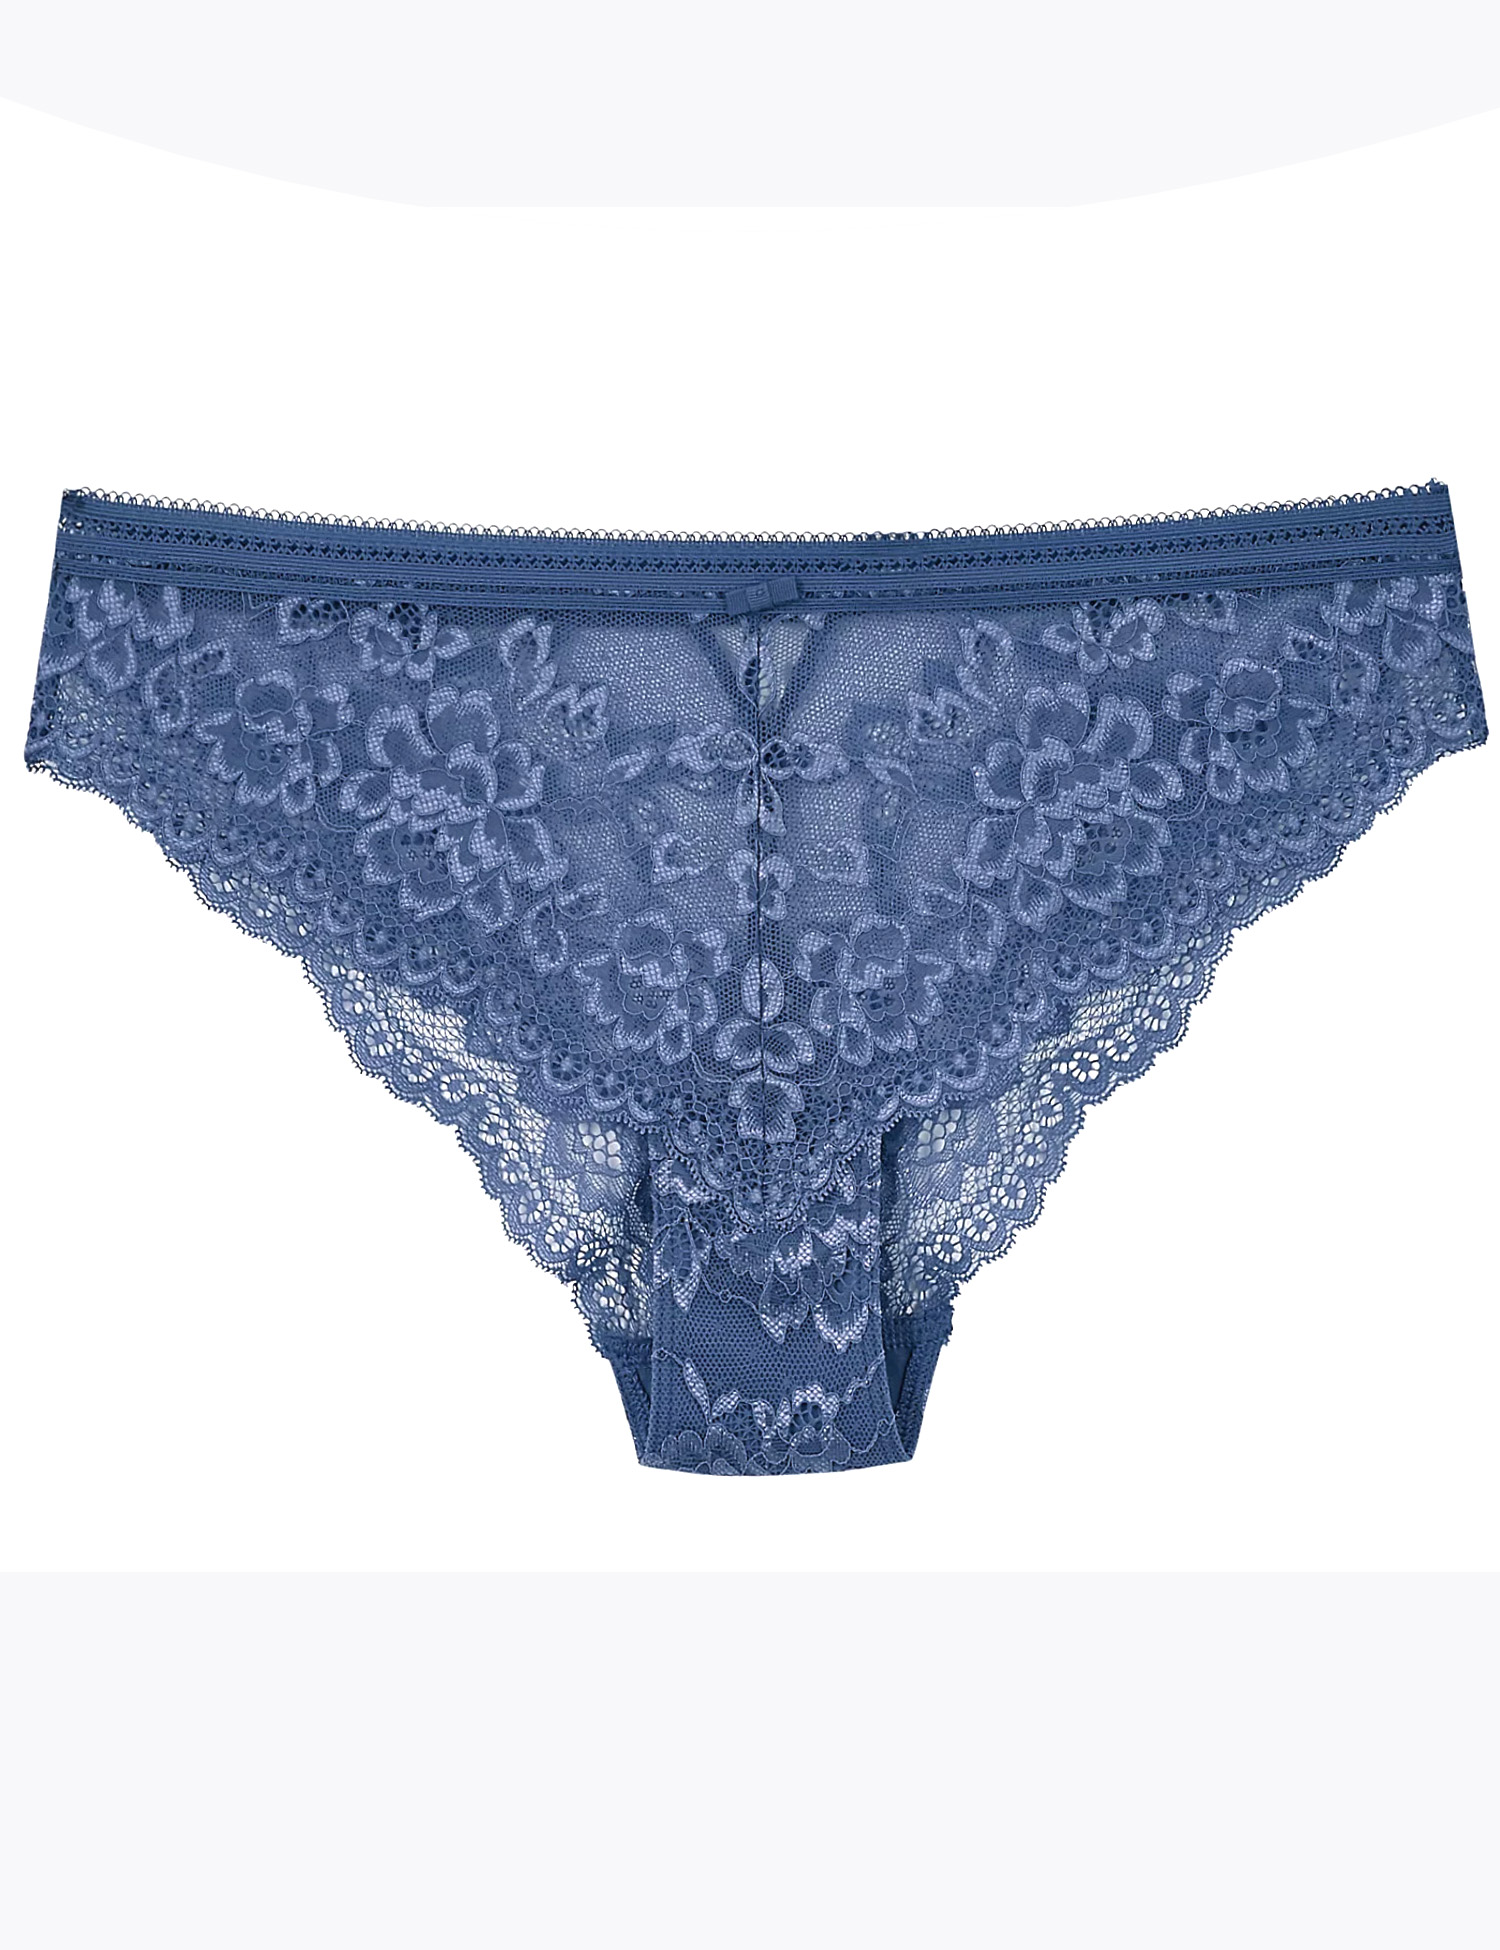 Marks and Spencer - - M&5 BLUE Lace High Rise Midi Knickers - Size 6 to 14